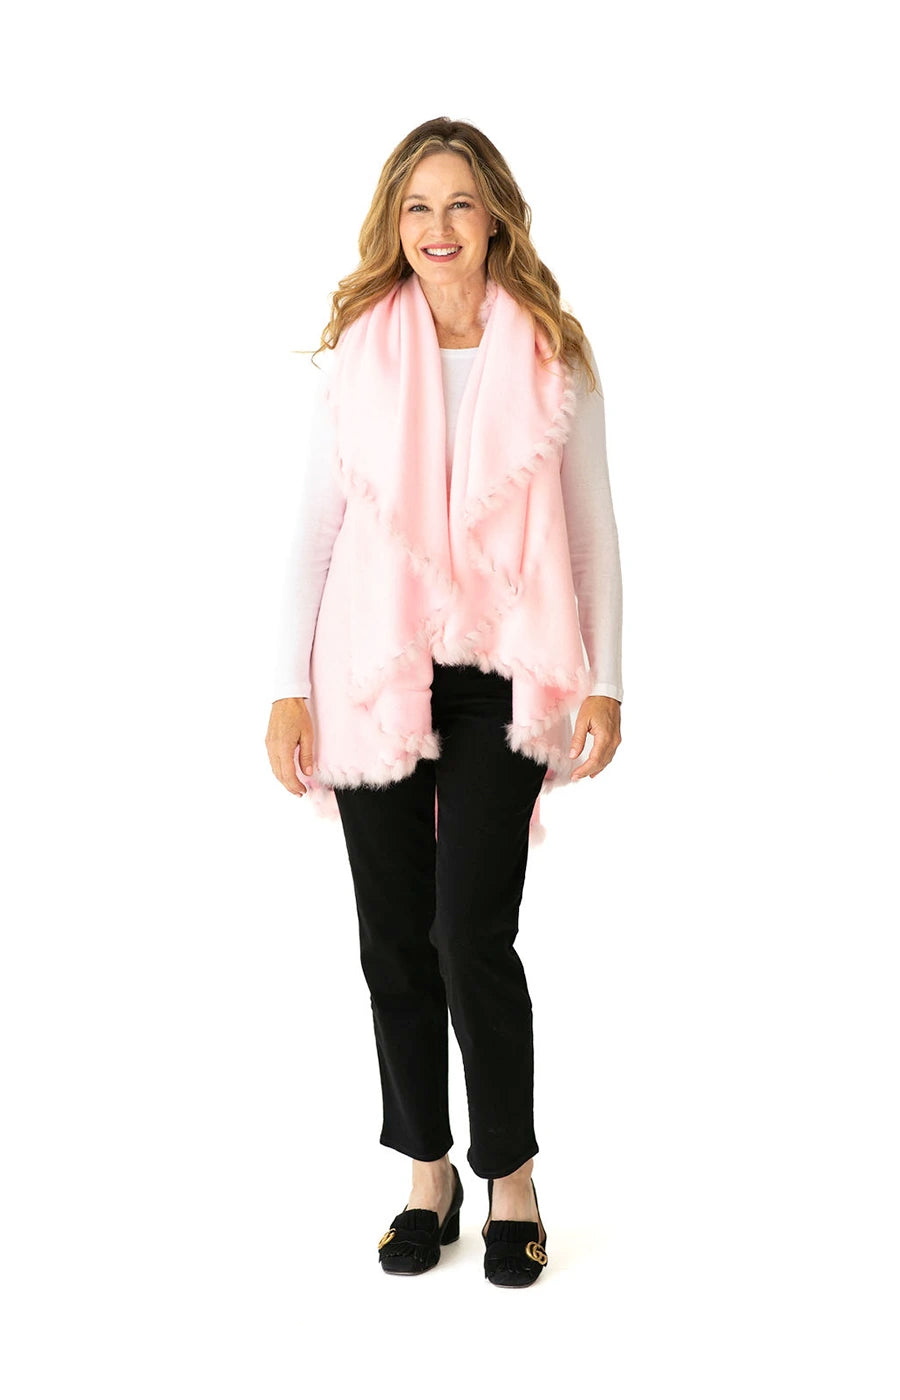 Shawl Sweater Vest in Light Pink with Fur Trim